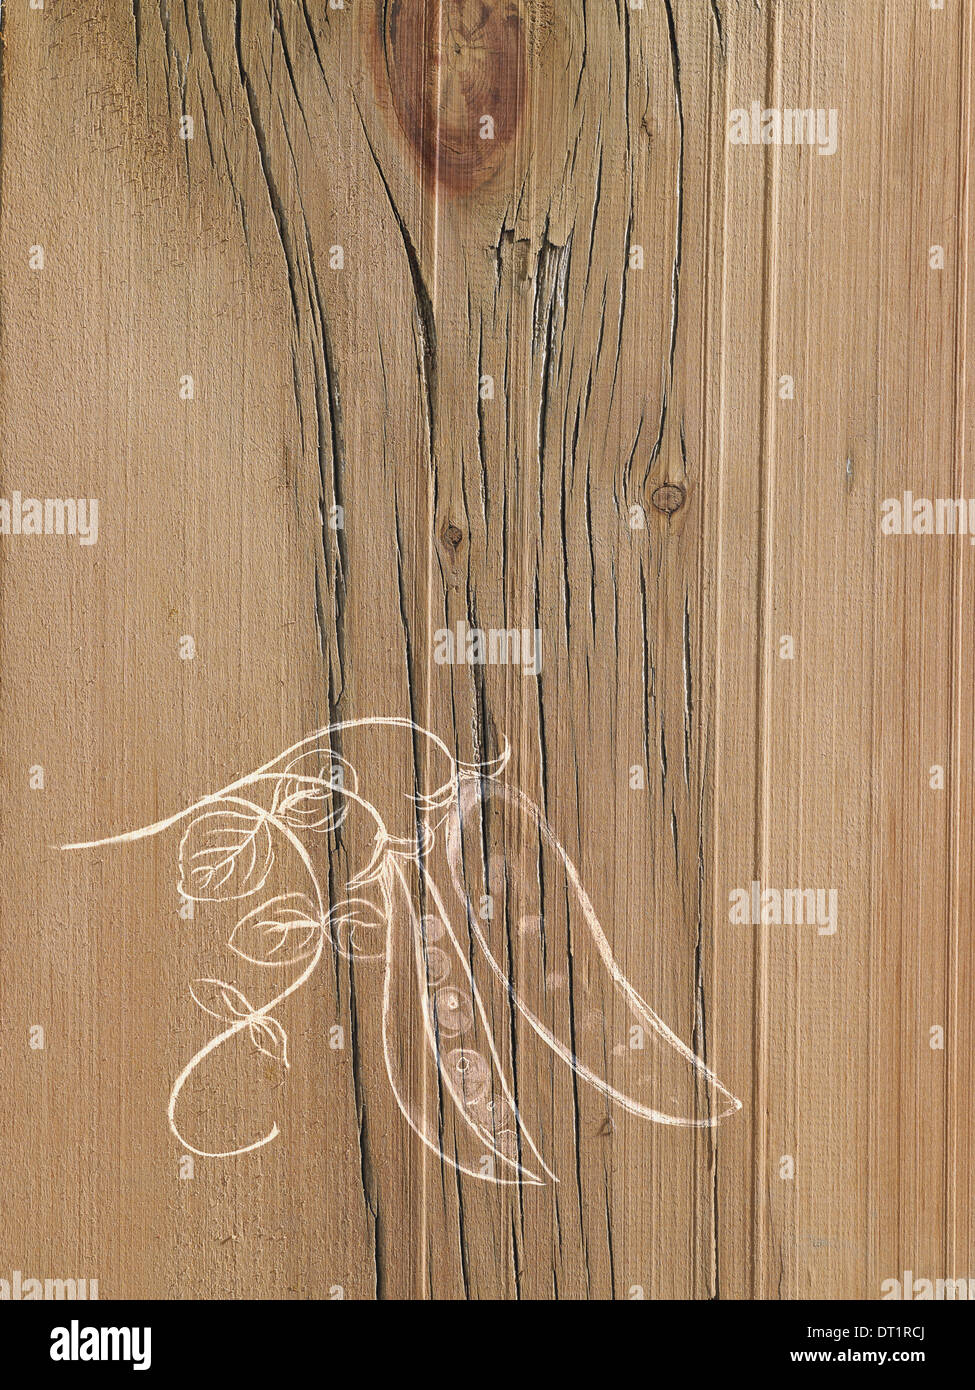 A line drawing image on a natural wood grain background Fresh peas in a pod on the vine Stock Photo